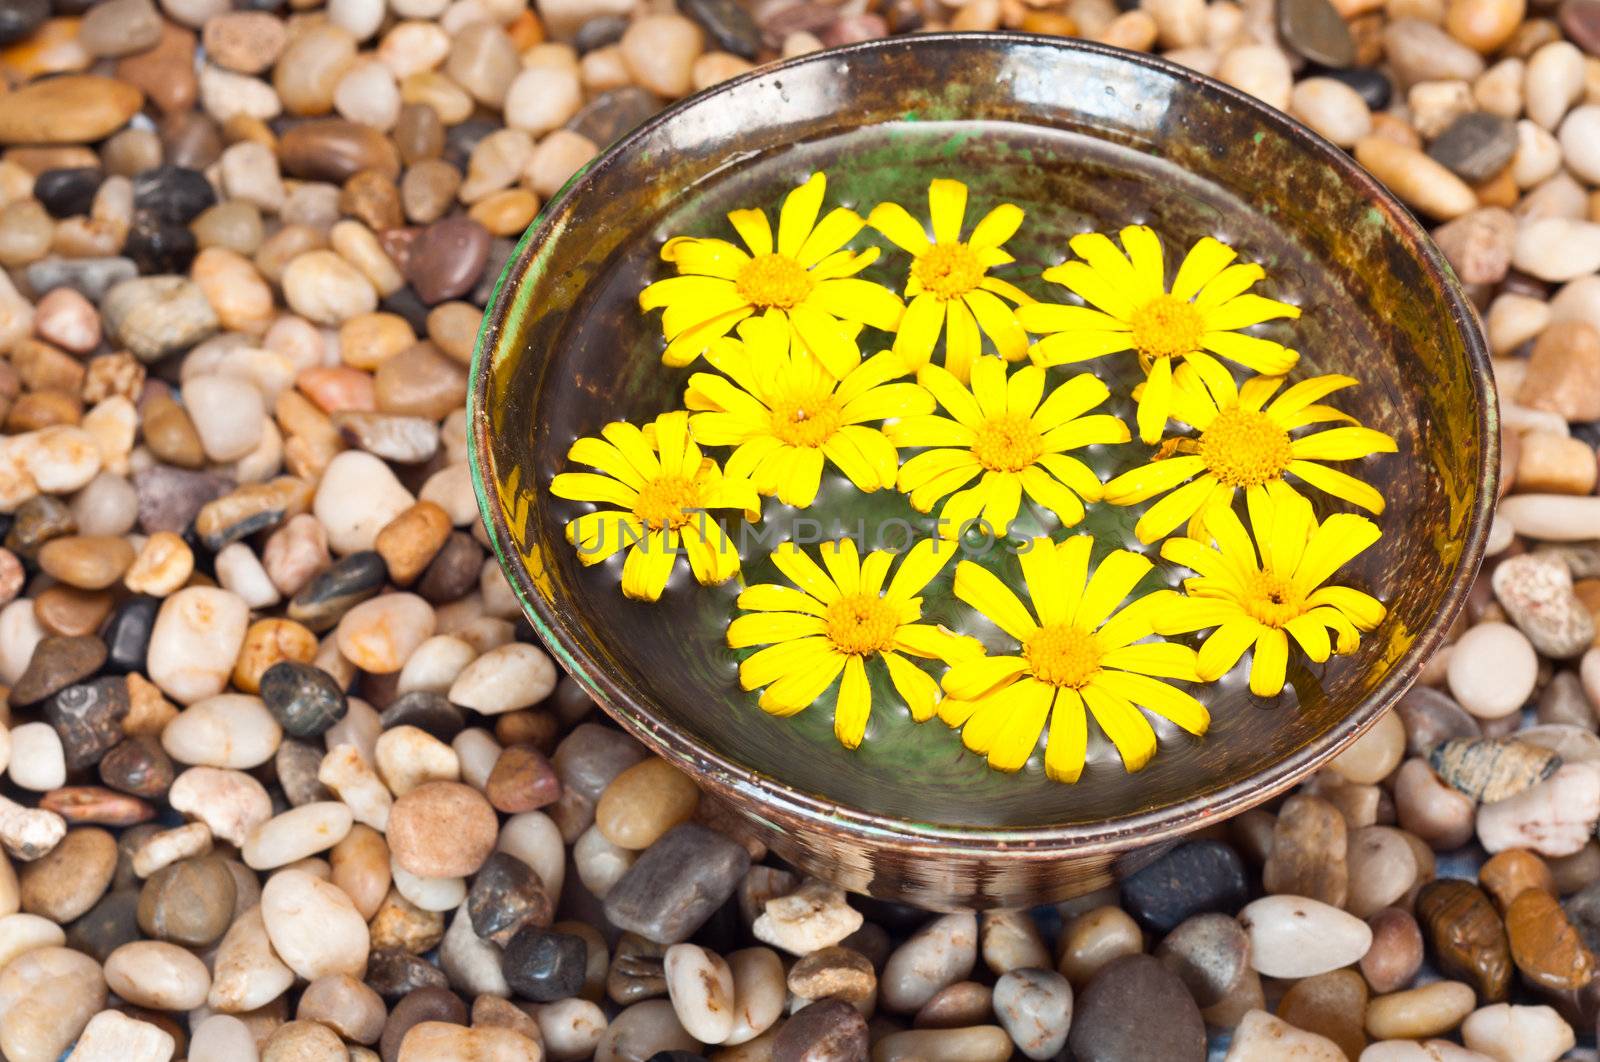 Floating yellow daisies on a pebble background